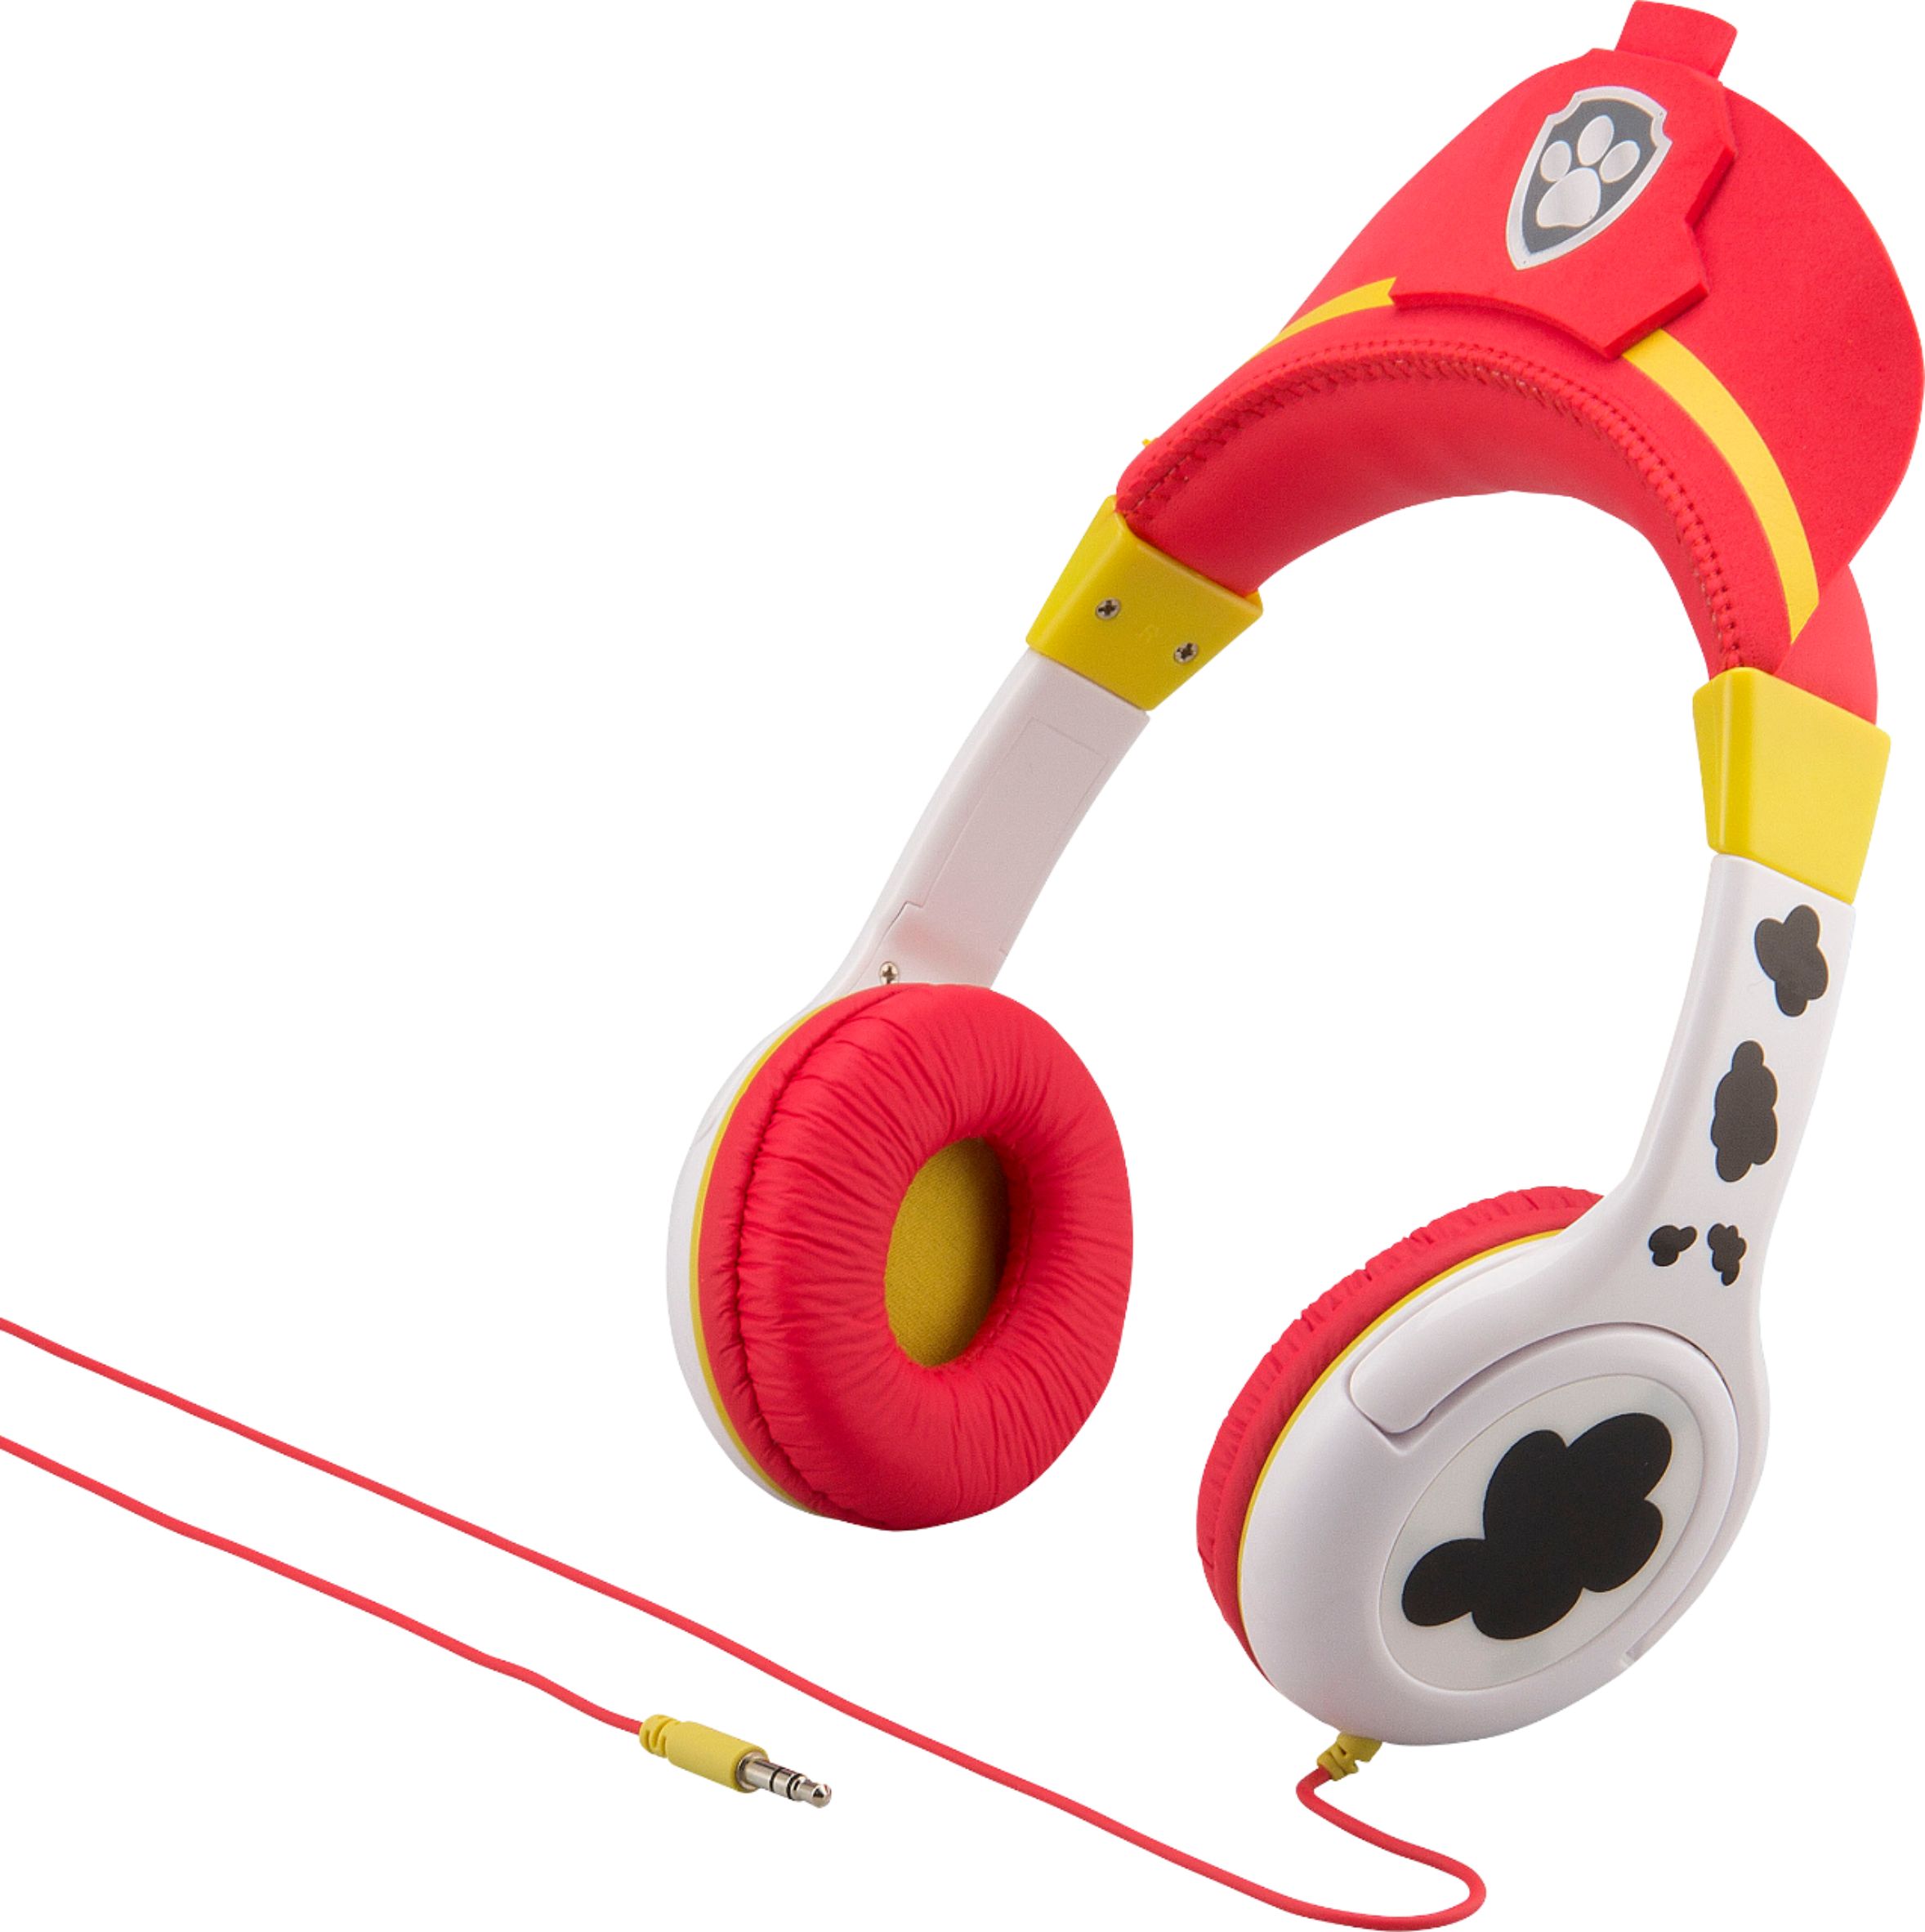 Angle View: PAW Patrol Marshall Children's Over-Ear Headphones, Multi-color, PW-140MA.EXv7